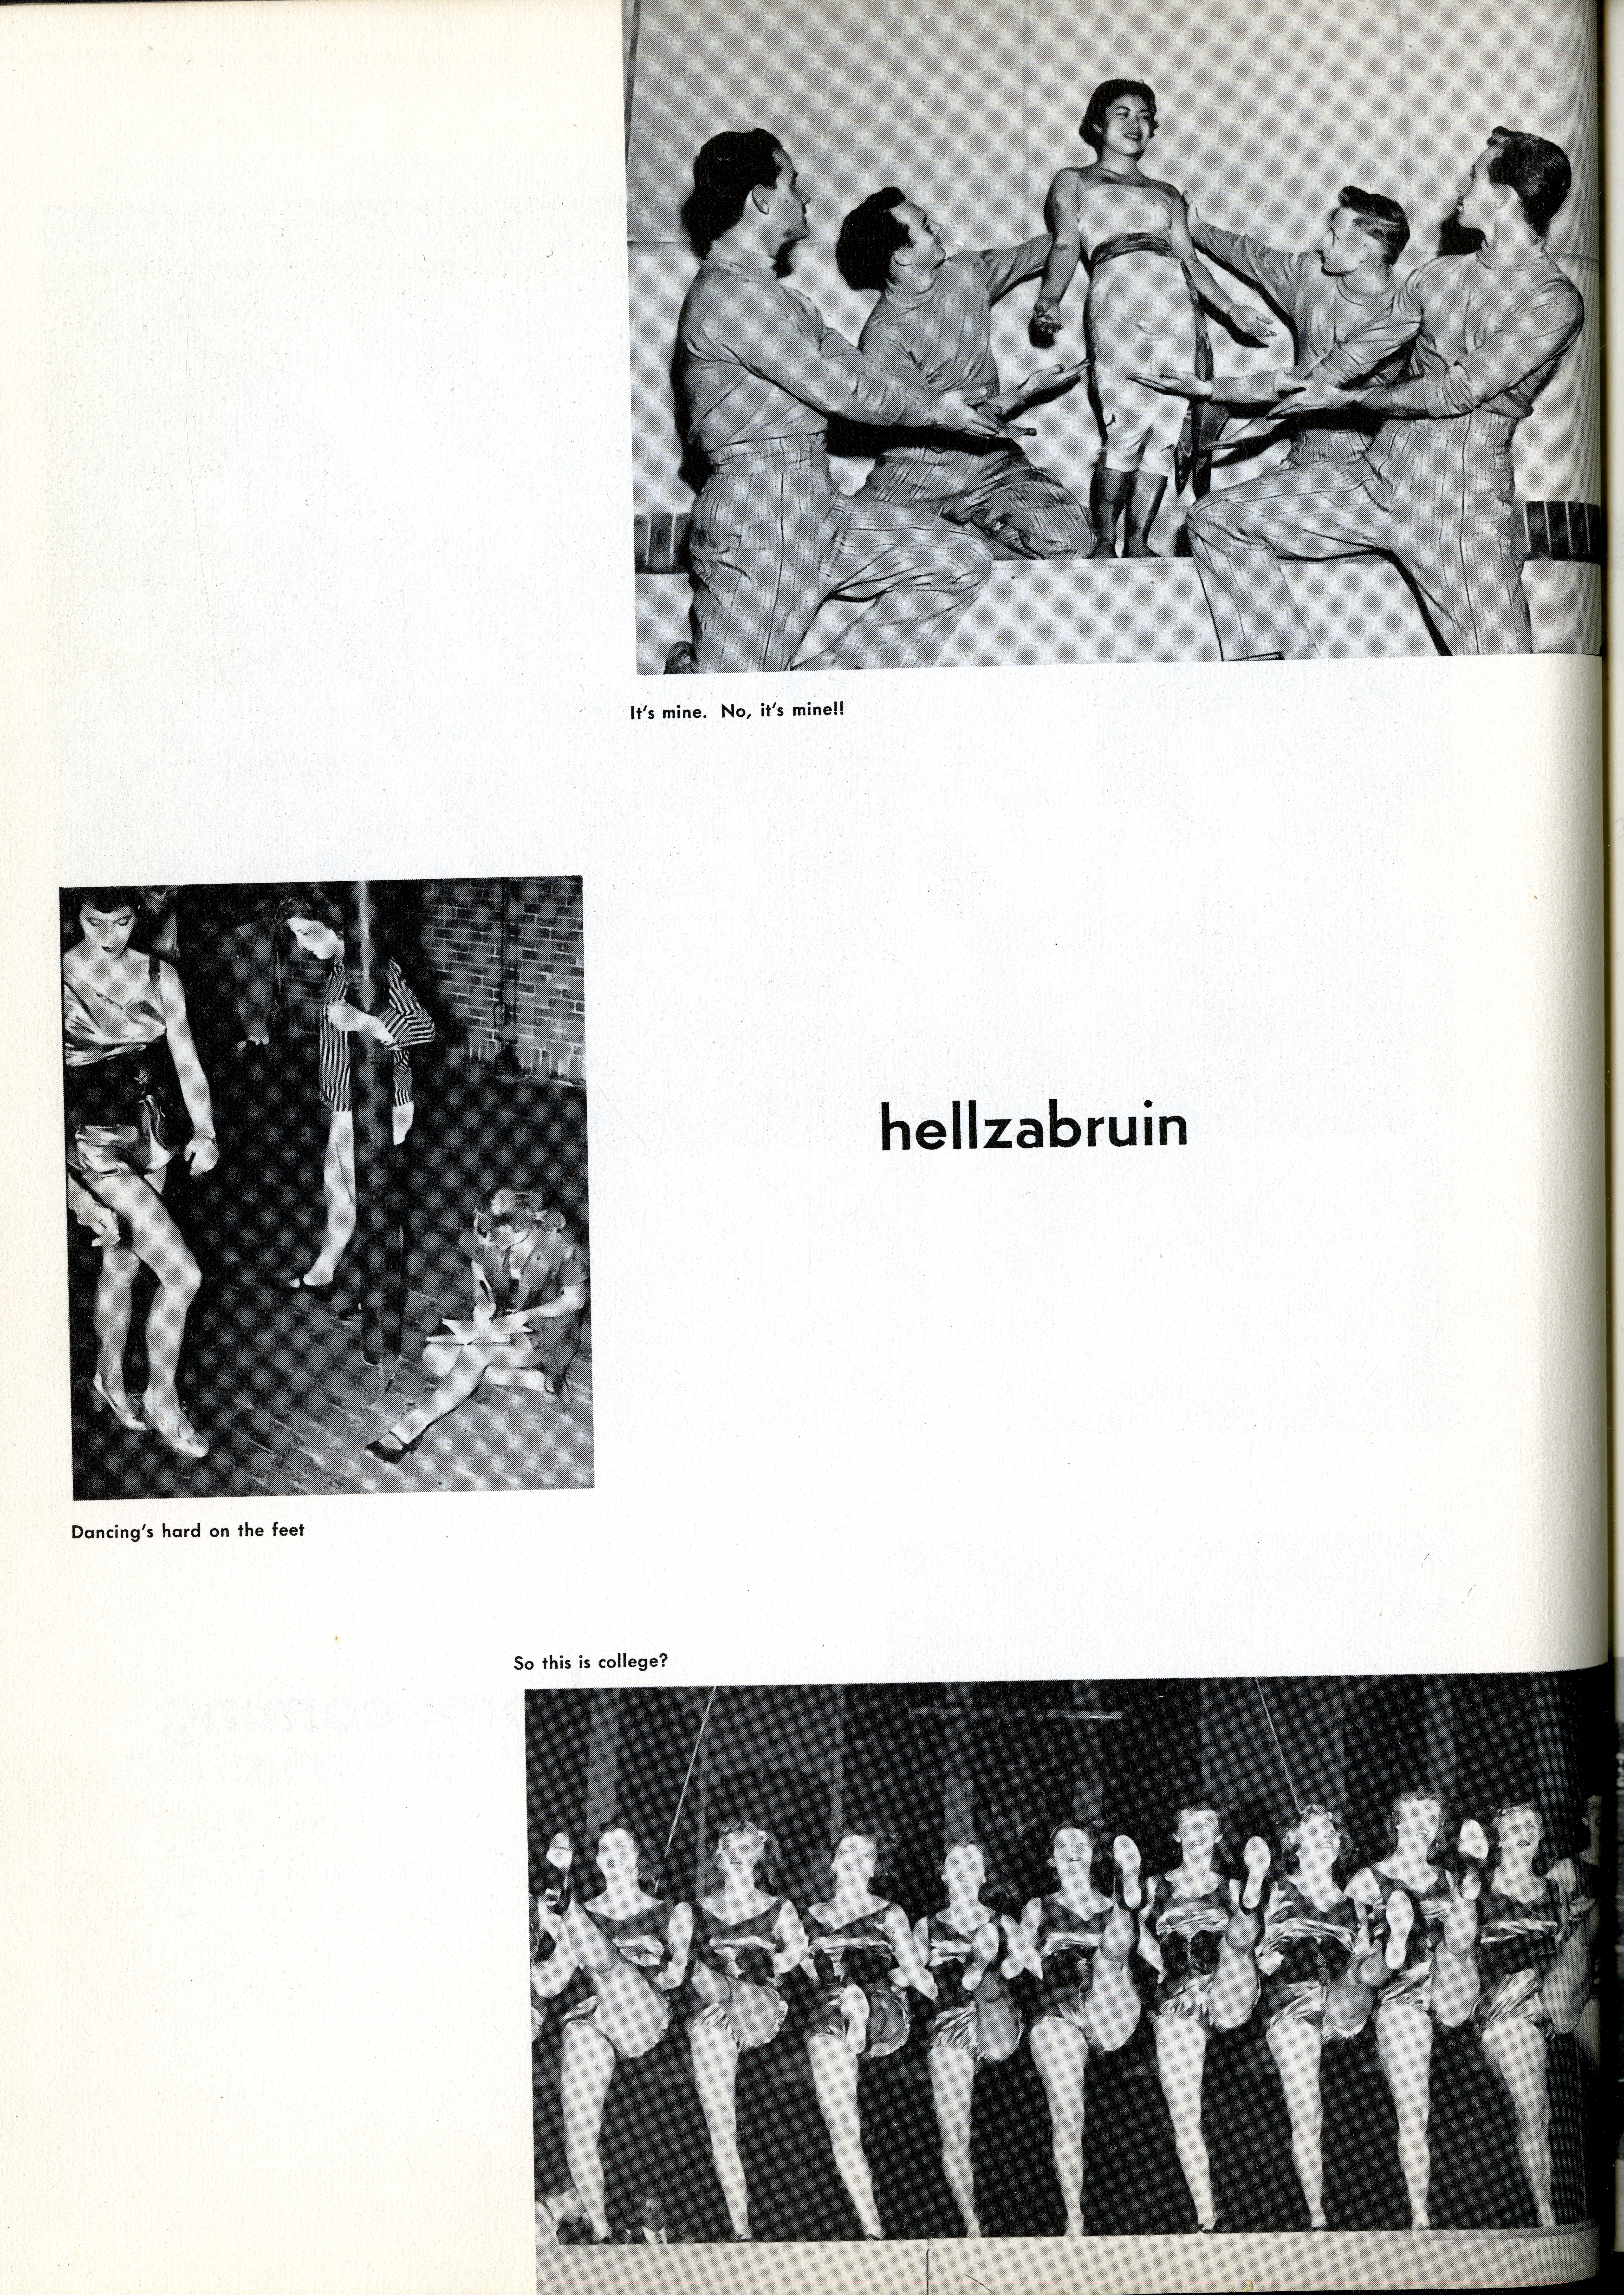 A collage from a 1950 yearbook that includes women dancing in a row